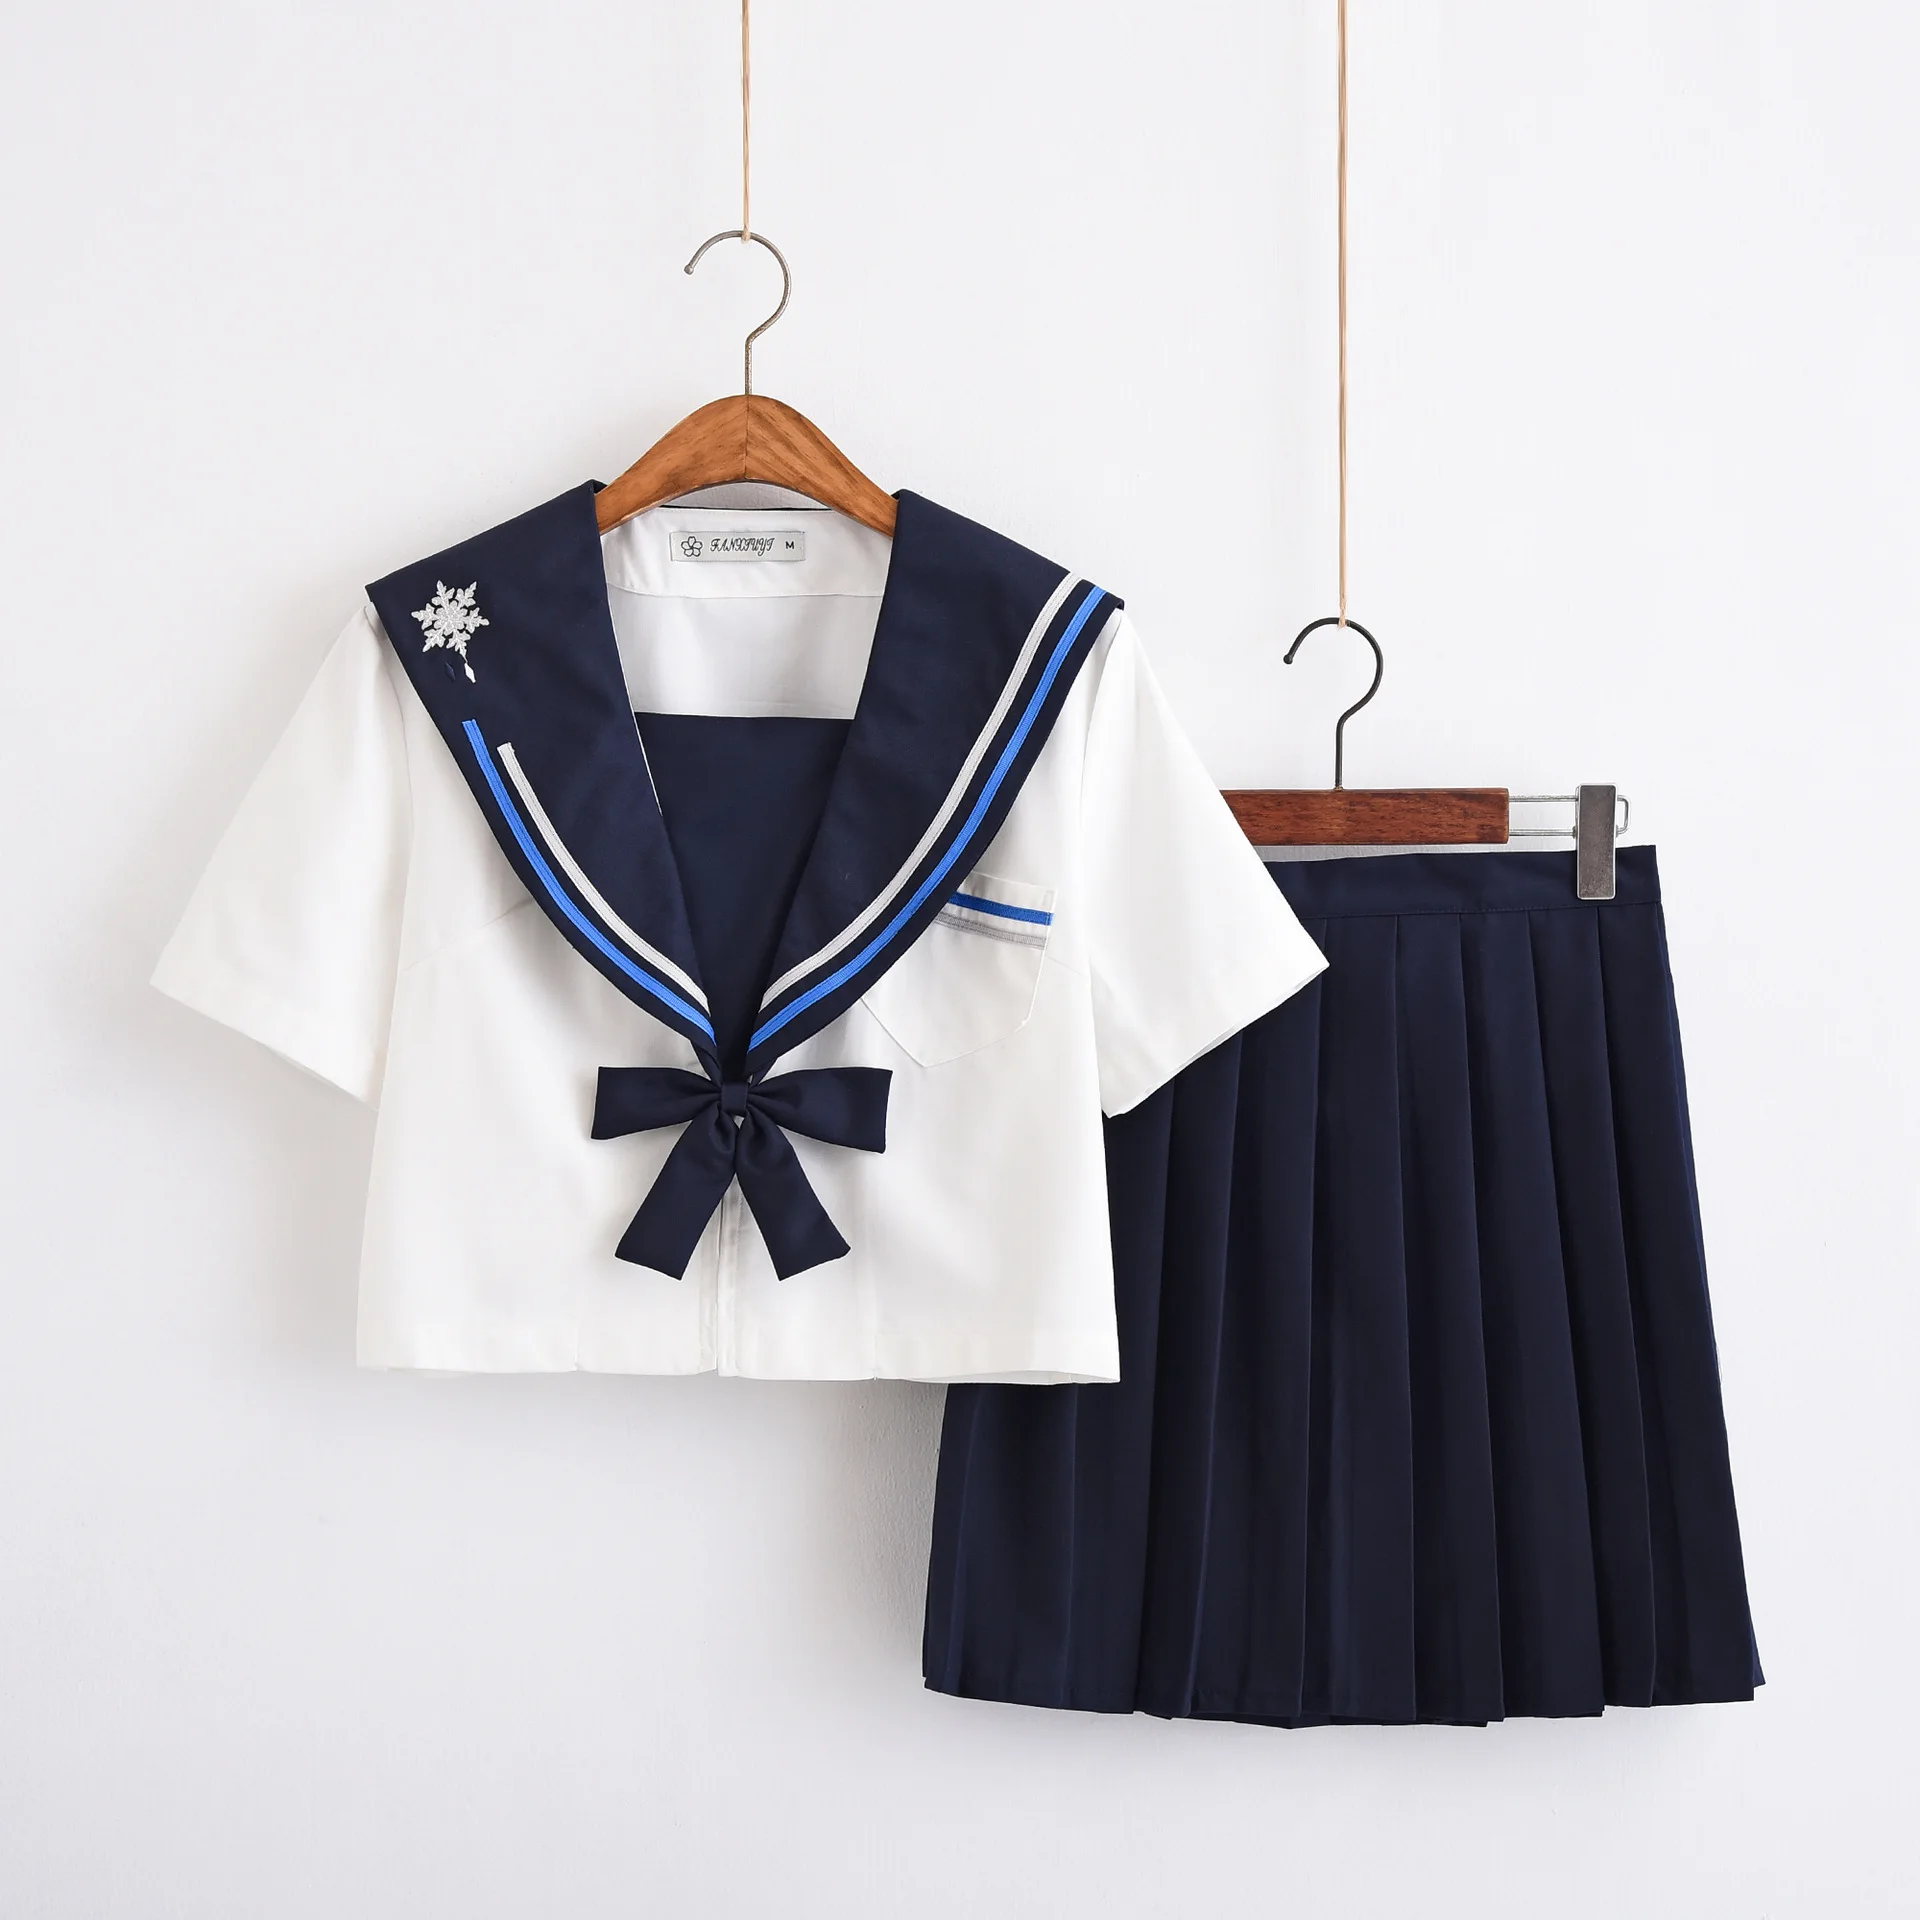 Japanese School Dress Uniforms Sailor Suit Cosplay Snowflake Embroidery School Uniform For Girls Students Anime Pleated Skirt - Цвет: Short-sleeved suit